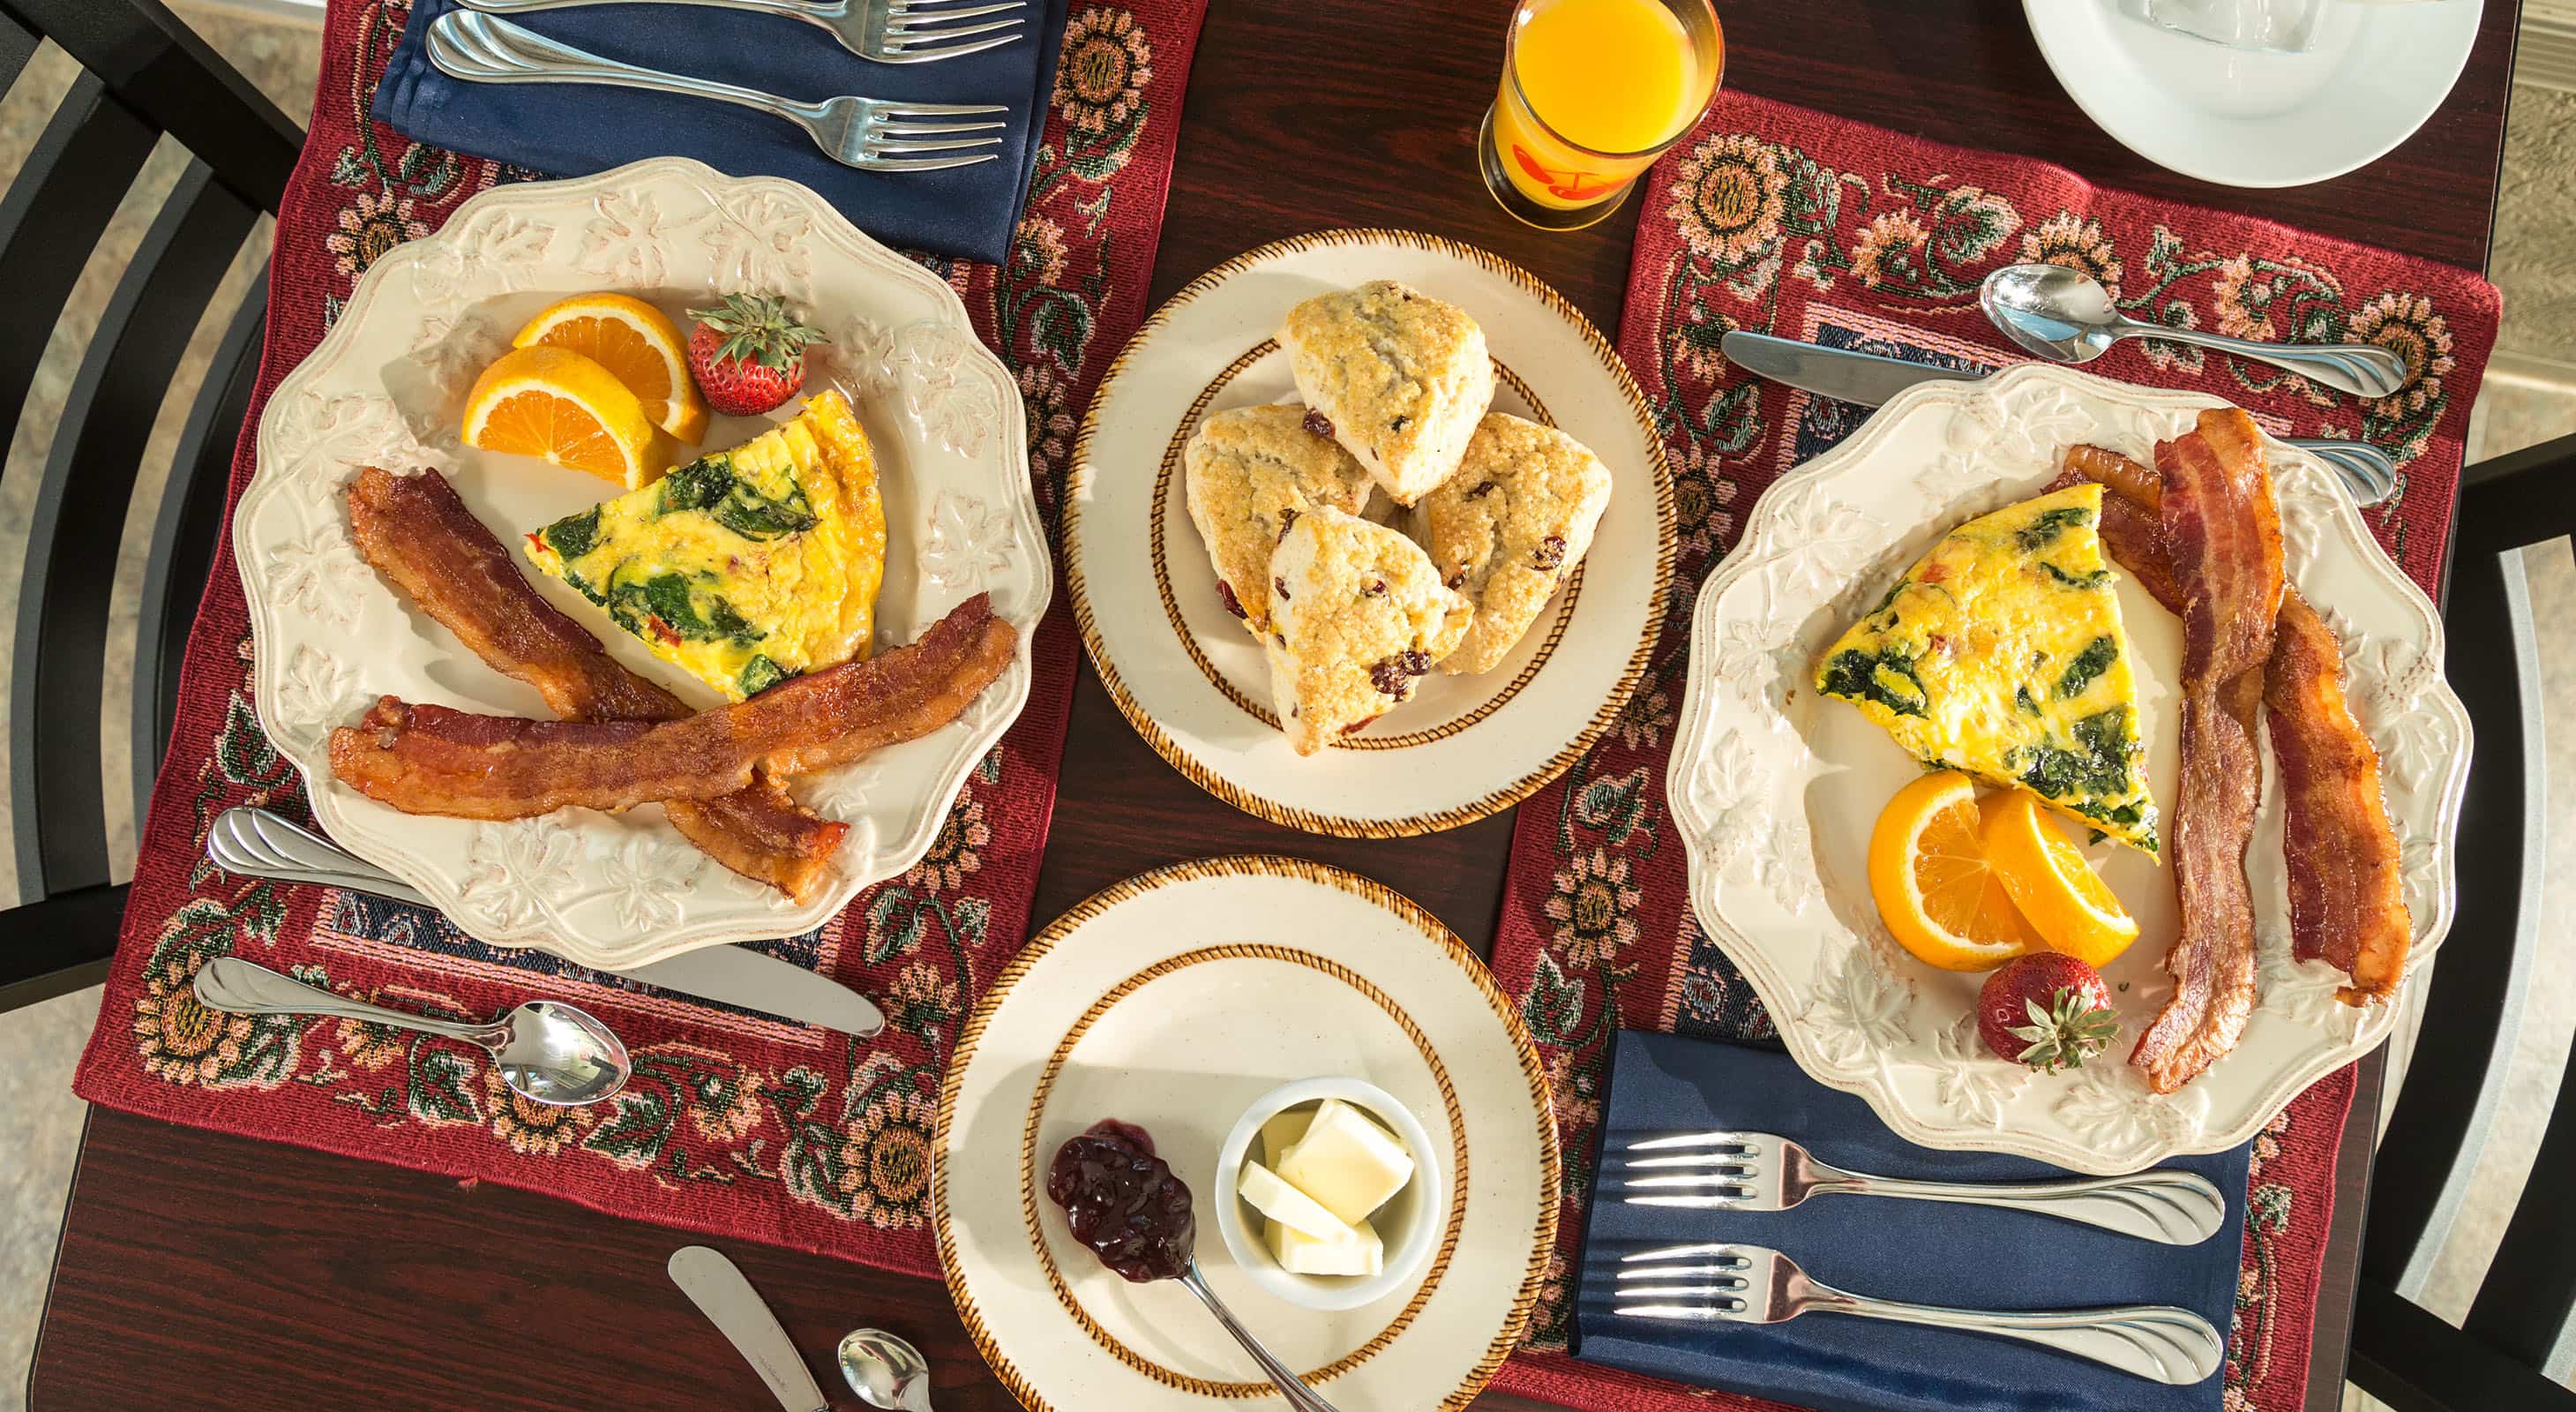 Kansas dining spread of breakfast foods on table with quiche, eggs, bacon, and fresh fruits